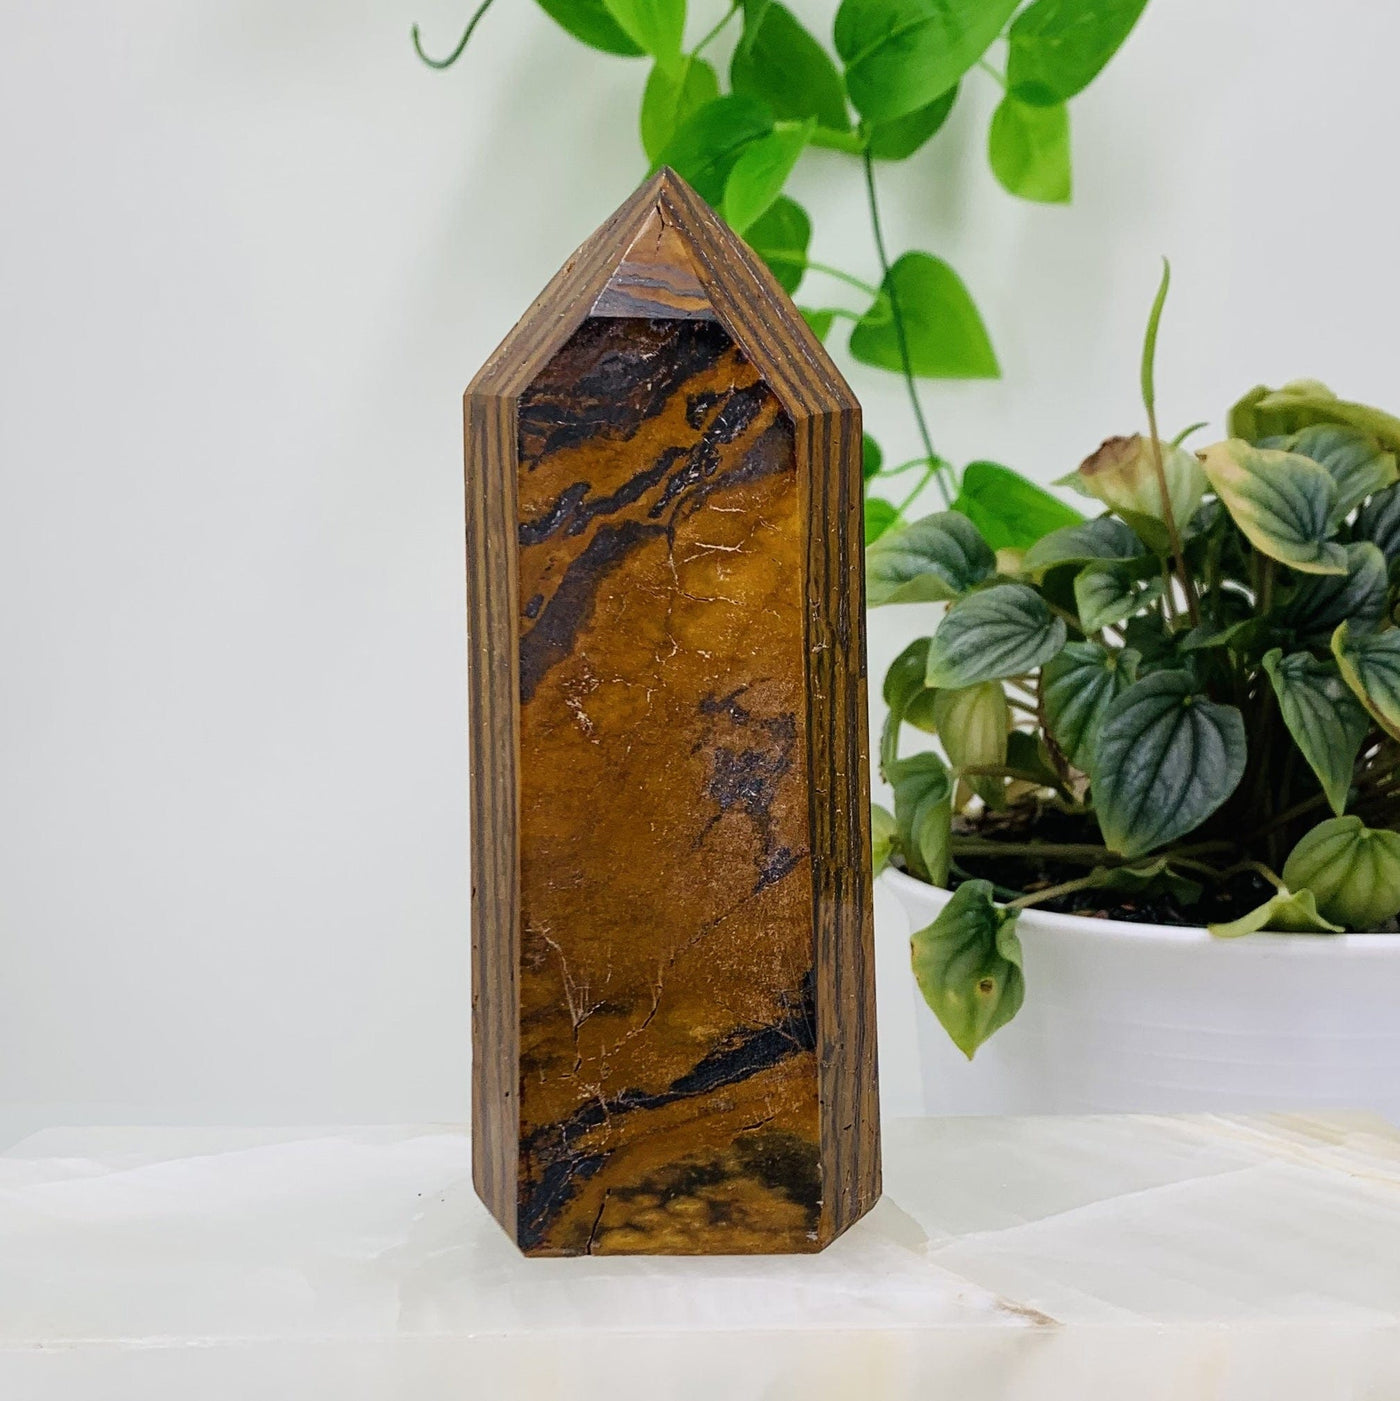 Back side Shot of Tigers eye Polished Tower for this listing, The tigers eye polished tower is being displayed on a white marbled surface and white back ground next to a green natural plant.